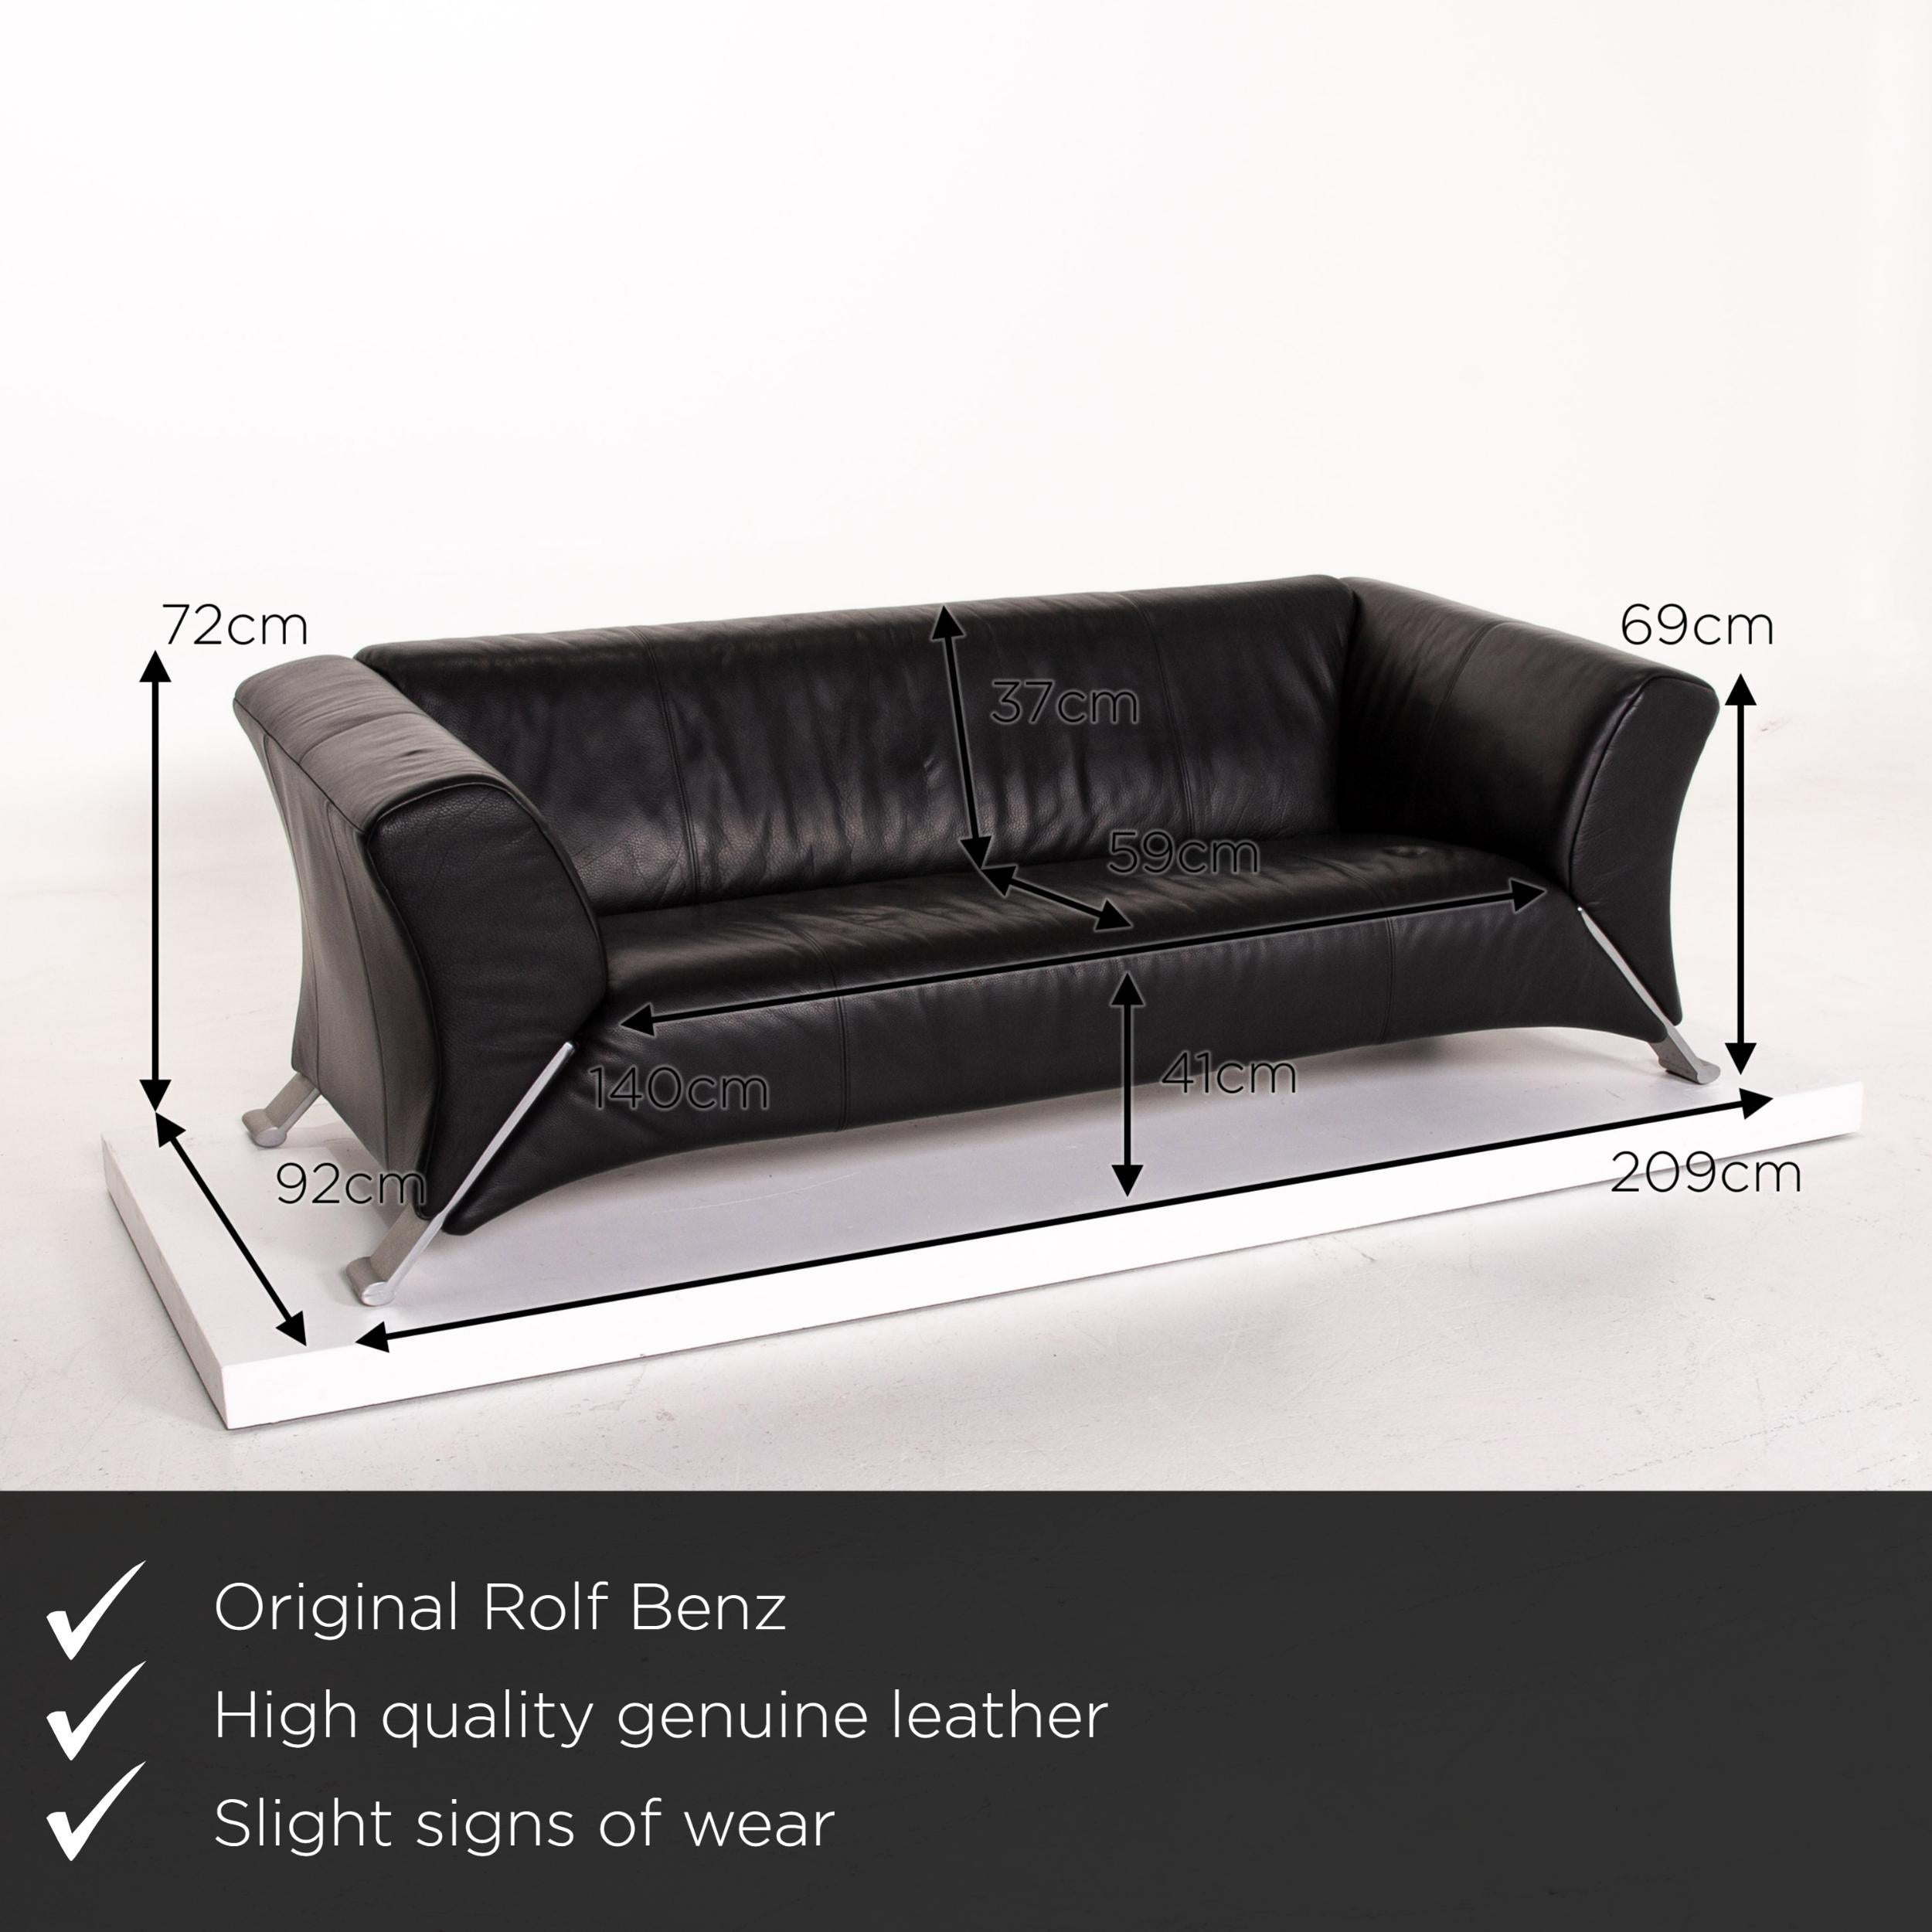 We present to you a Rolf Benz 322 leather sofa black three-seat couch.
 
 

 Product measurements in centimeters:
 

Depth 92
Width 209
Height 72
Seat height 41
Rest height 69
Seat depth 59
Seat width 140
Back height 37.